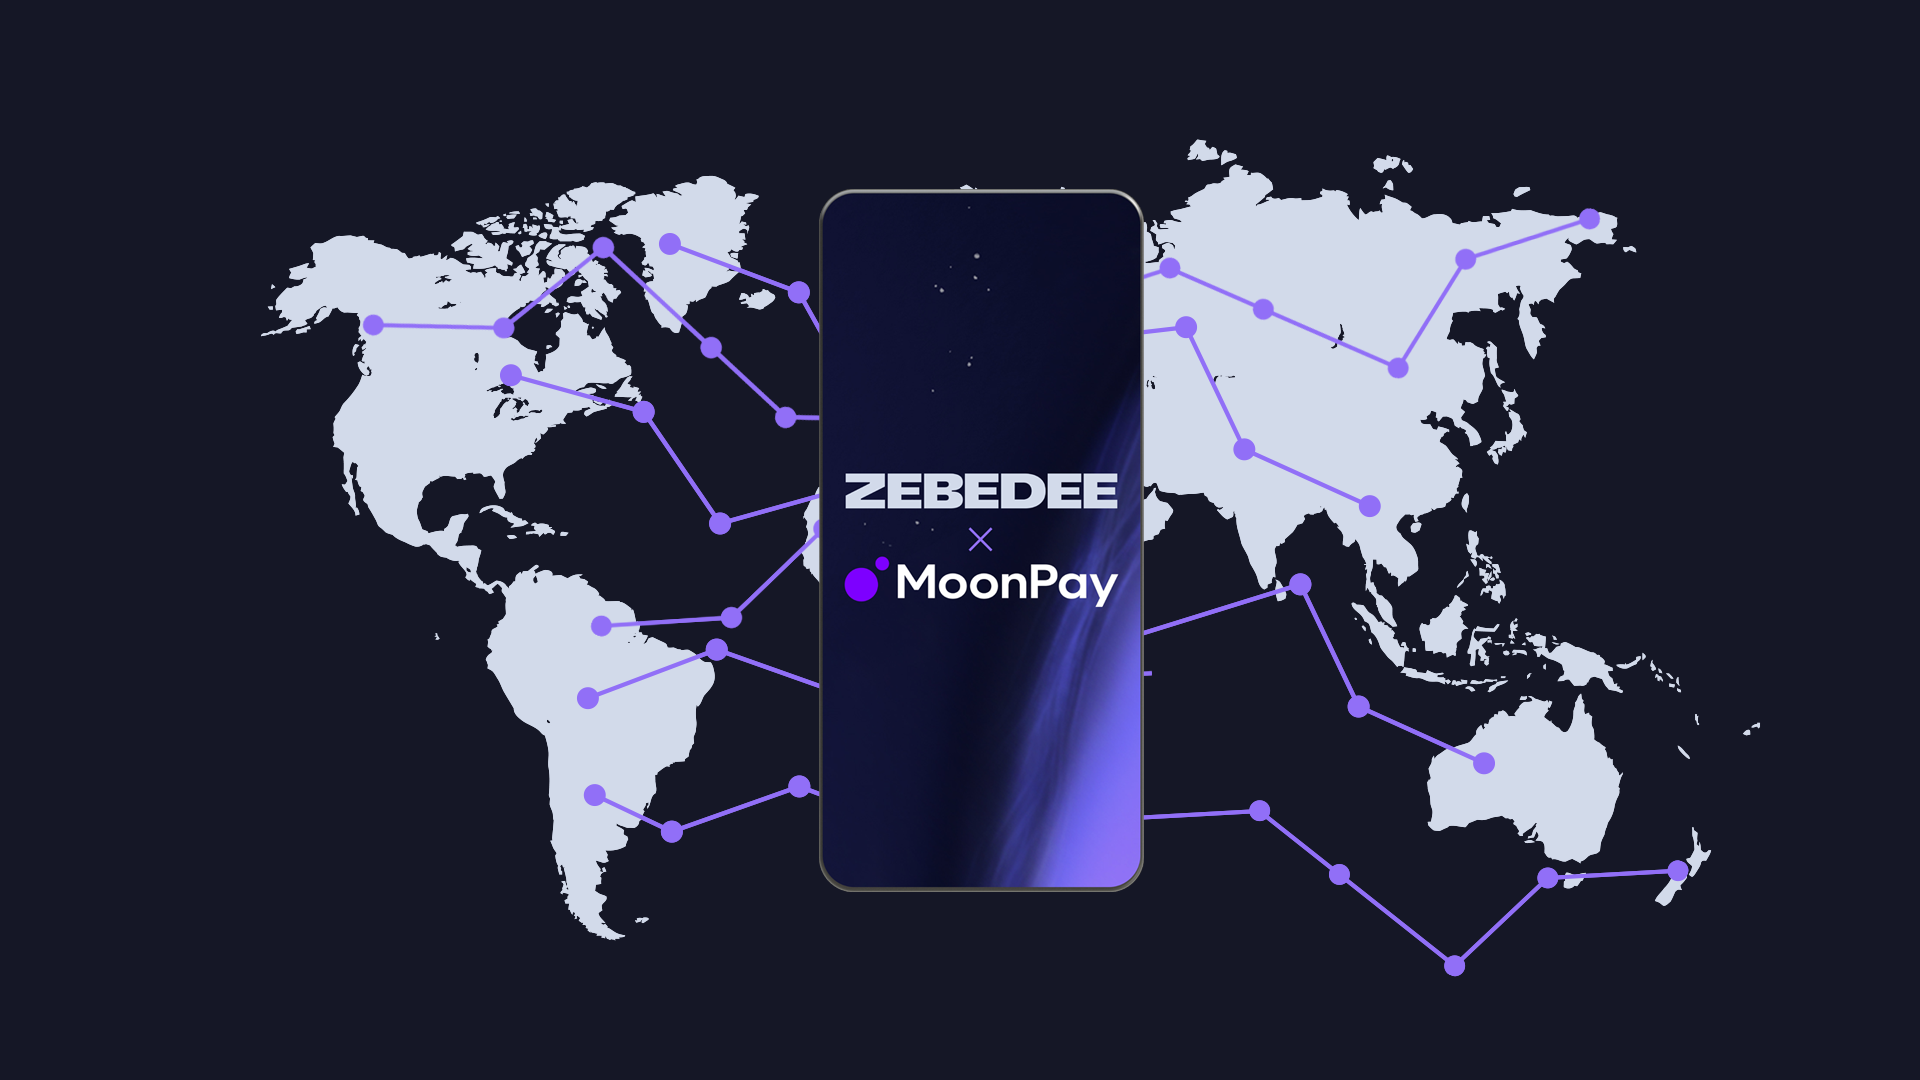 ZEBEDEE and MoonPay – easily top up using USD.